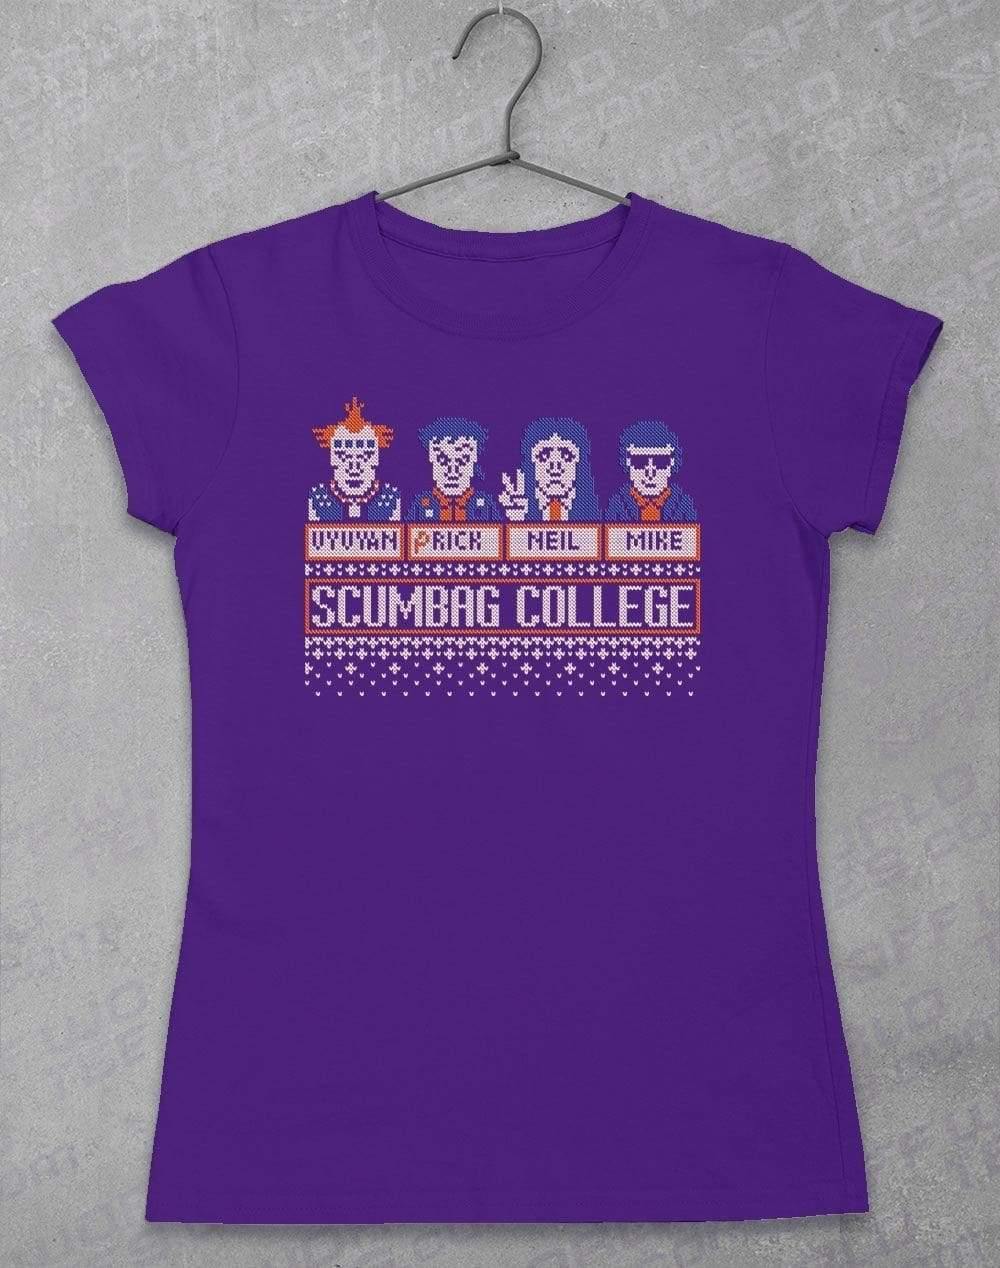 Scumbag College Festive Knitted-Look Women's T-Shirt 8-10 / Lilac  - Off World Tees